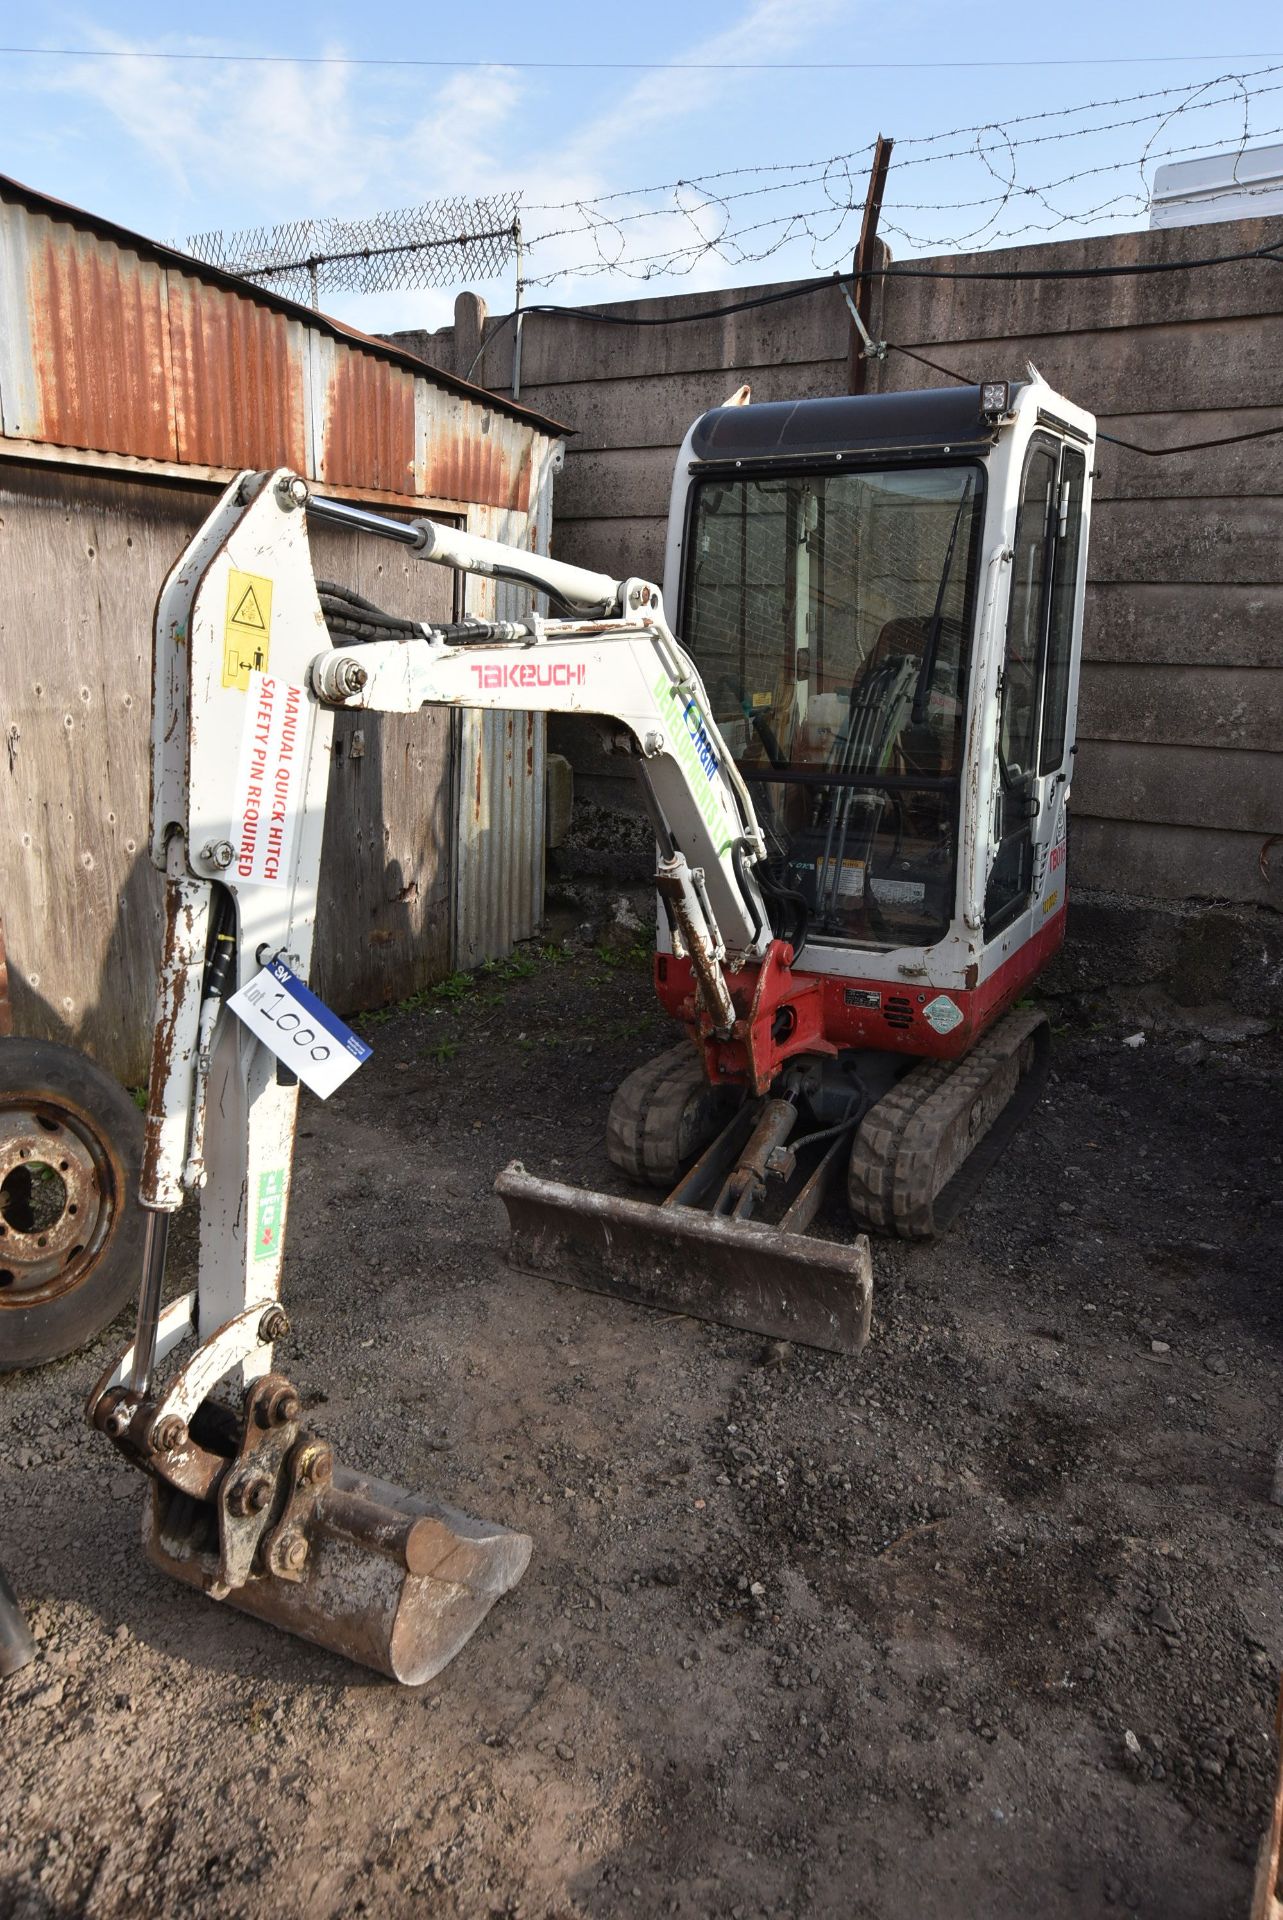 Takeuchi TB016 1.5T TRACKED EXCAVATOR, serial no. 11620753, year of manufacture 2010, indicated